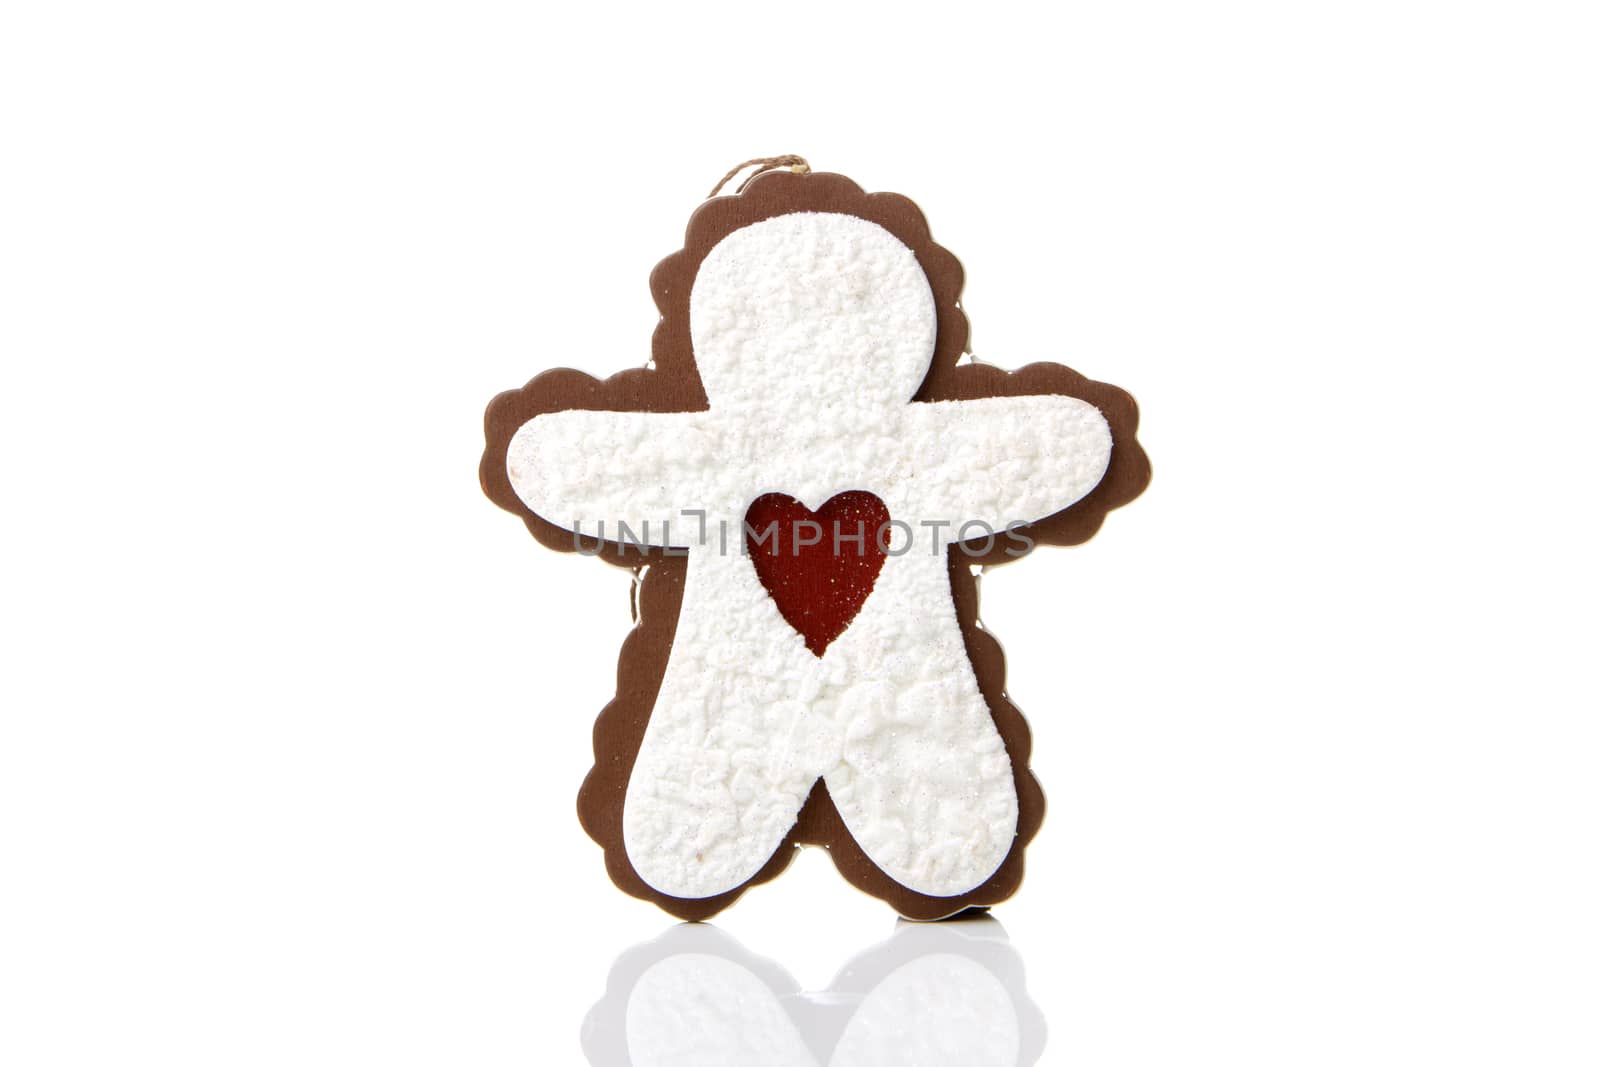 Gingerbread Man as a Christmas decoration with white background